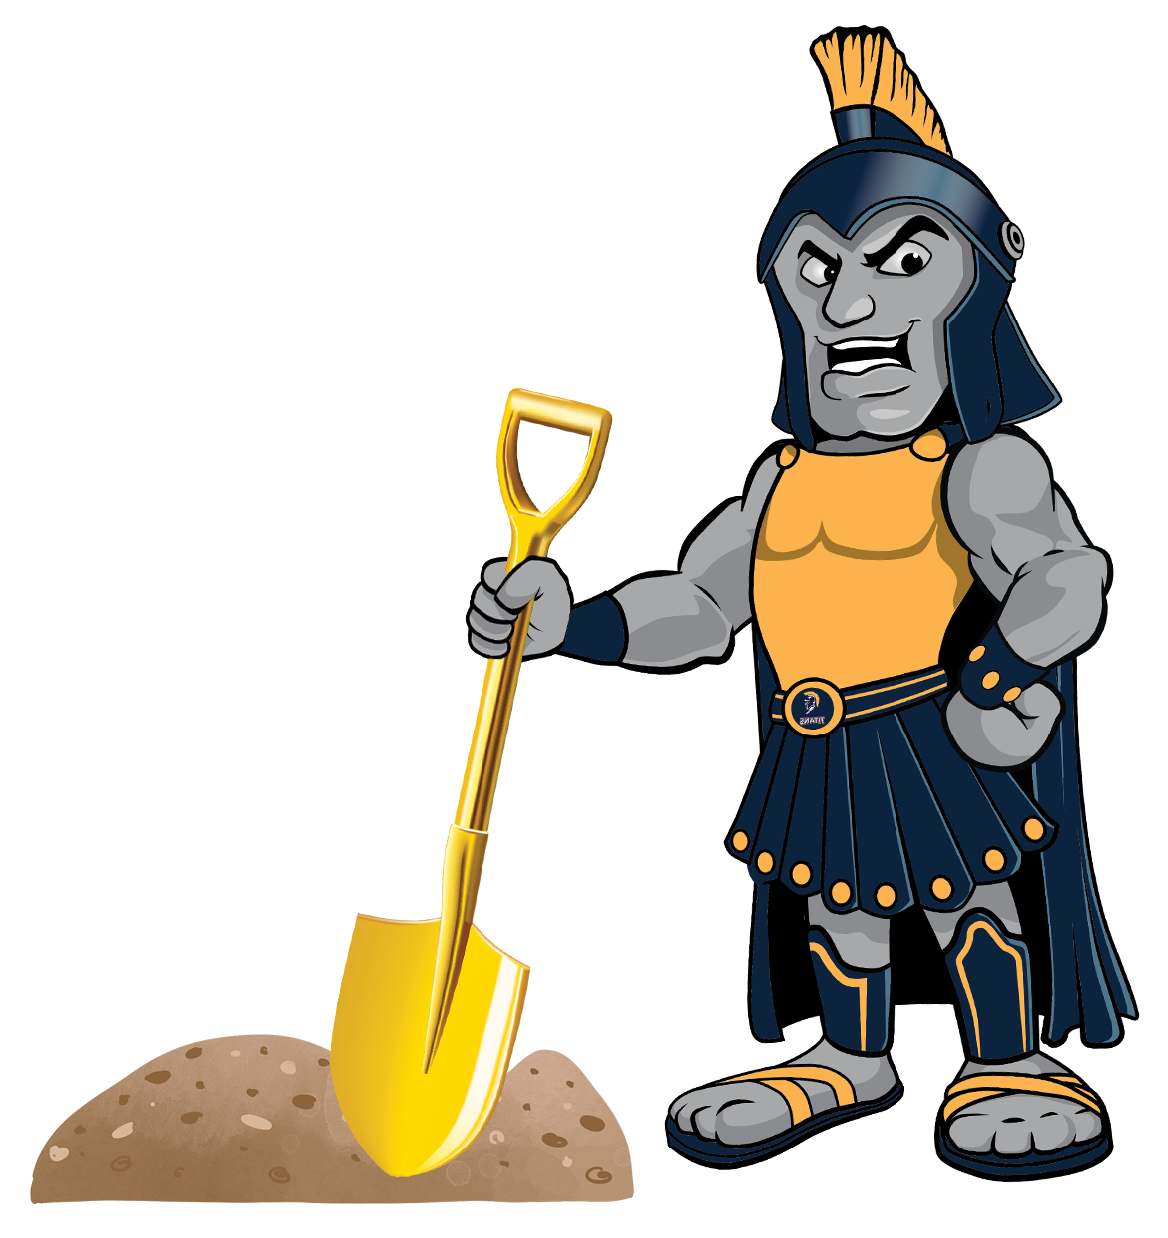 Titus with shovel and dirt for the groundbreaking